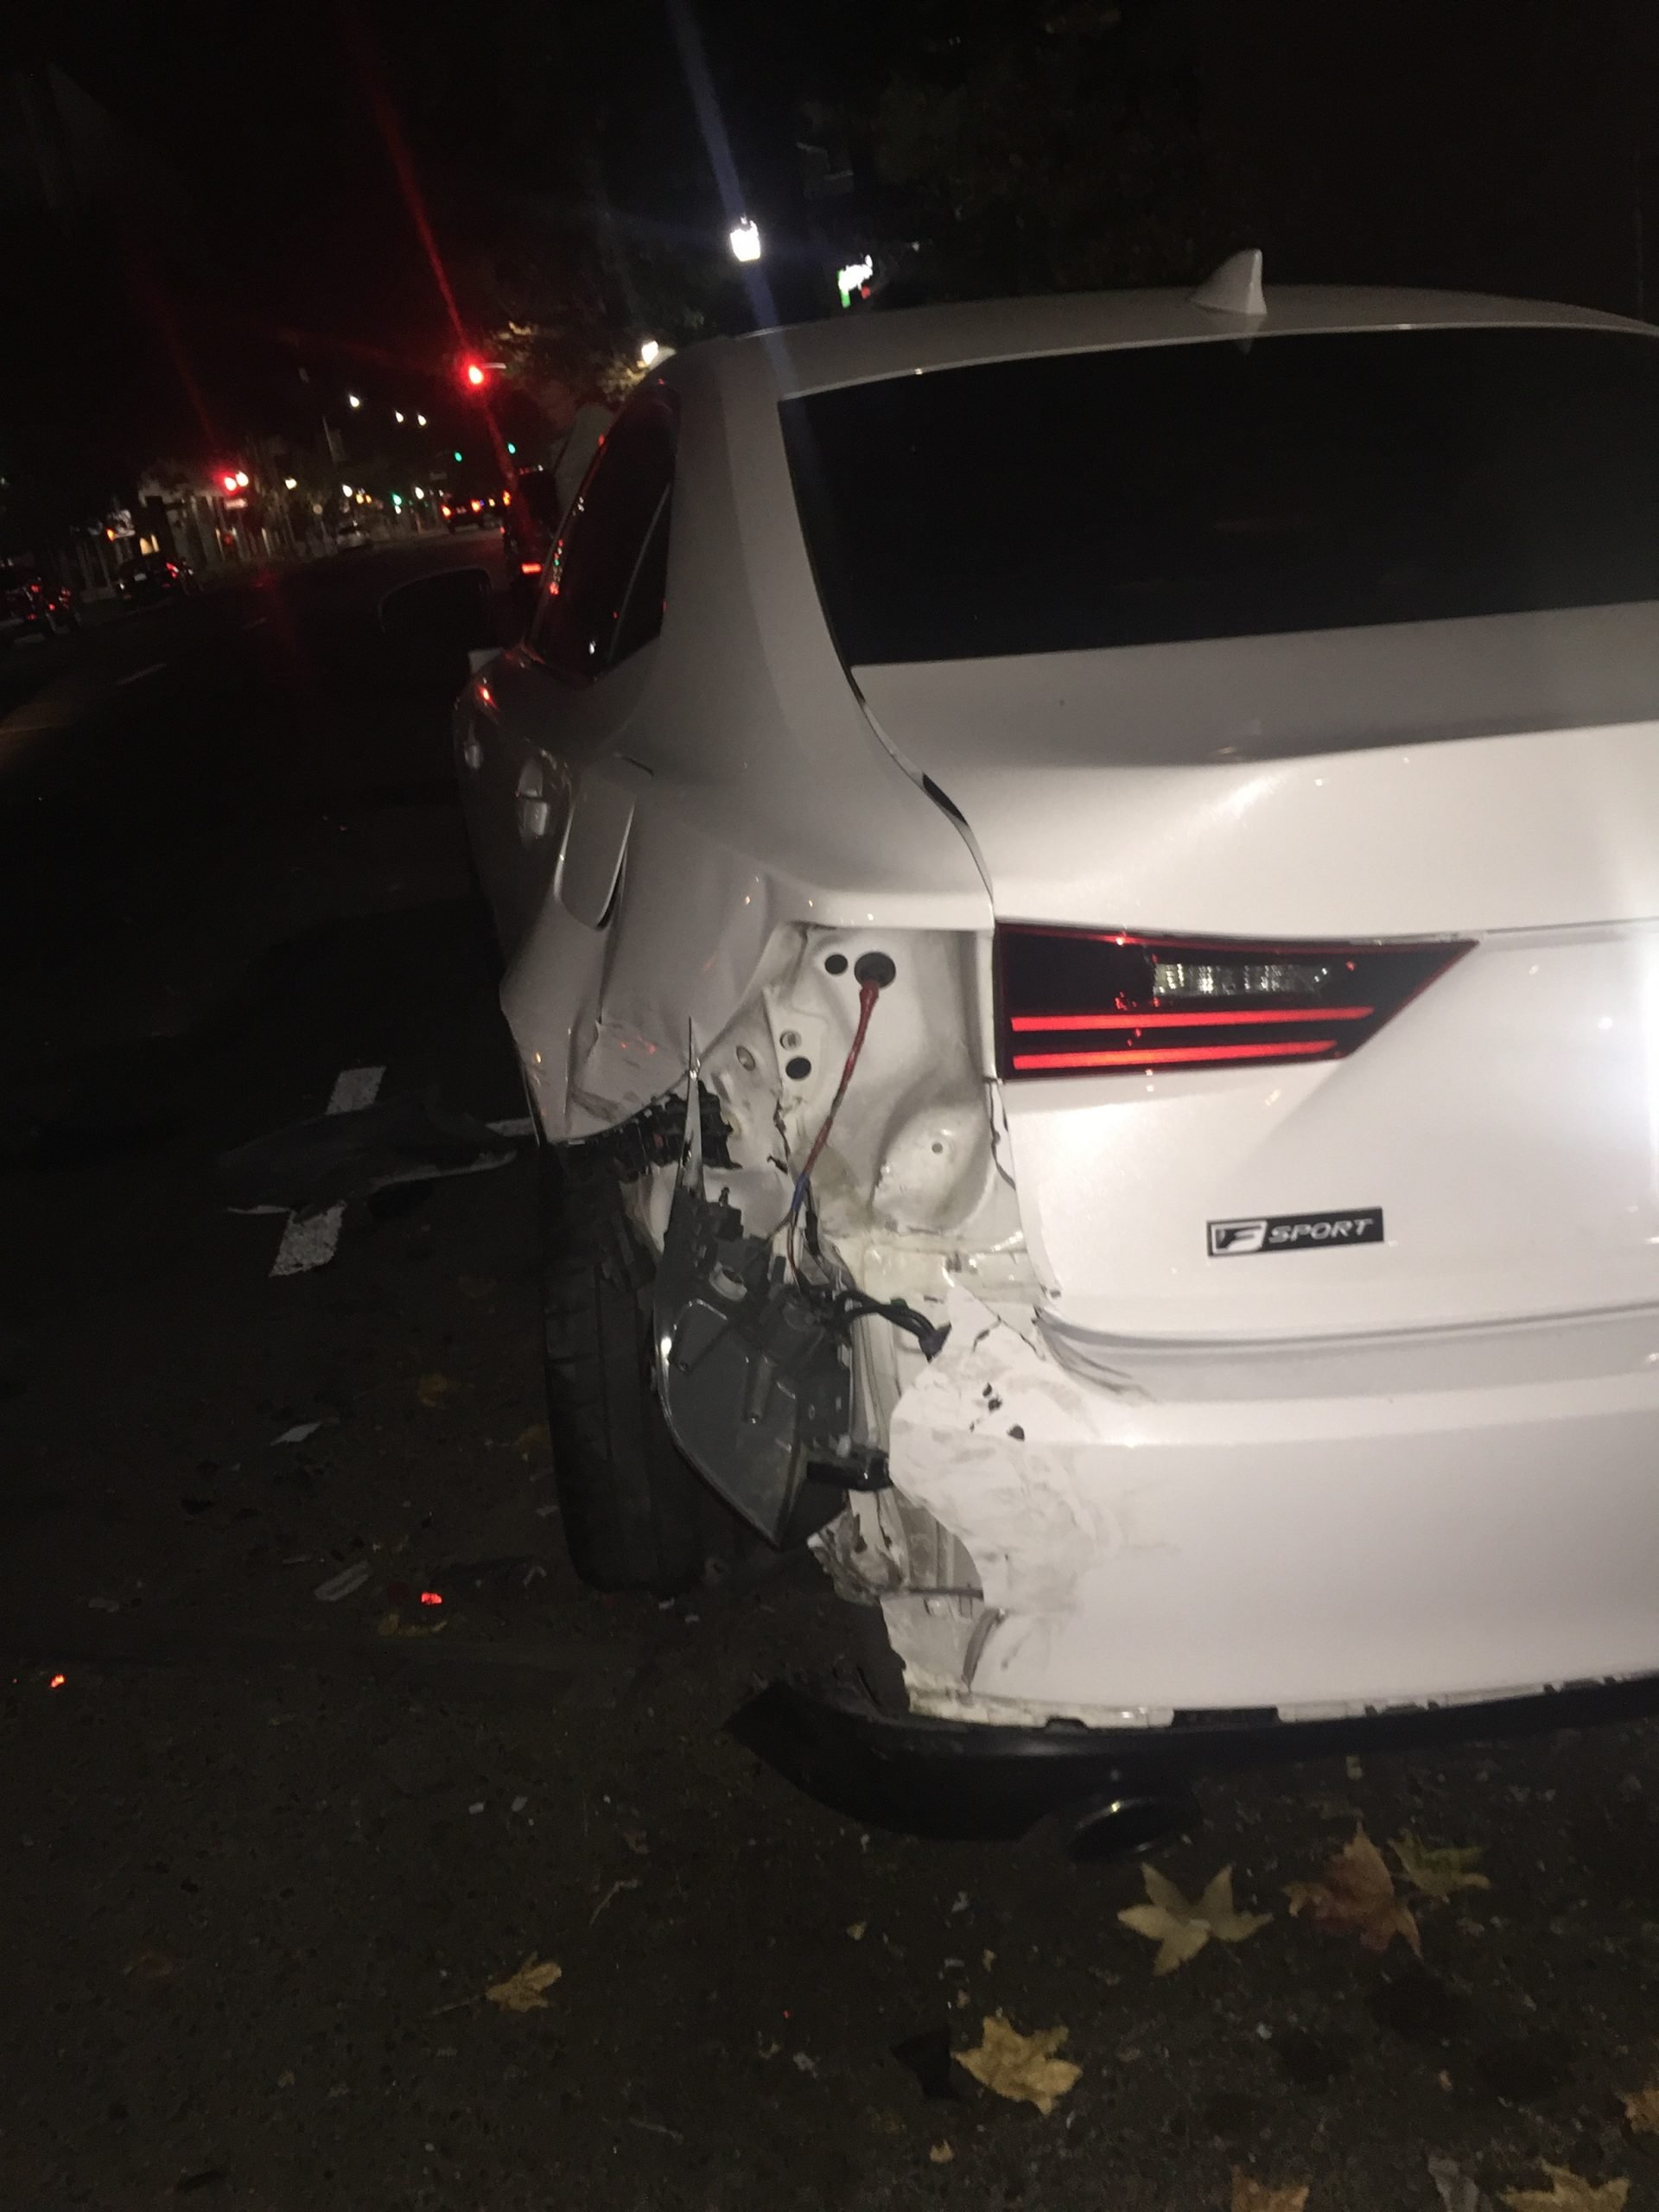 Should my car be considered totaled?